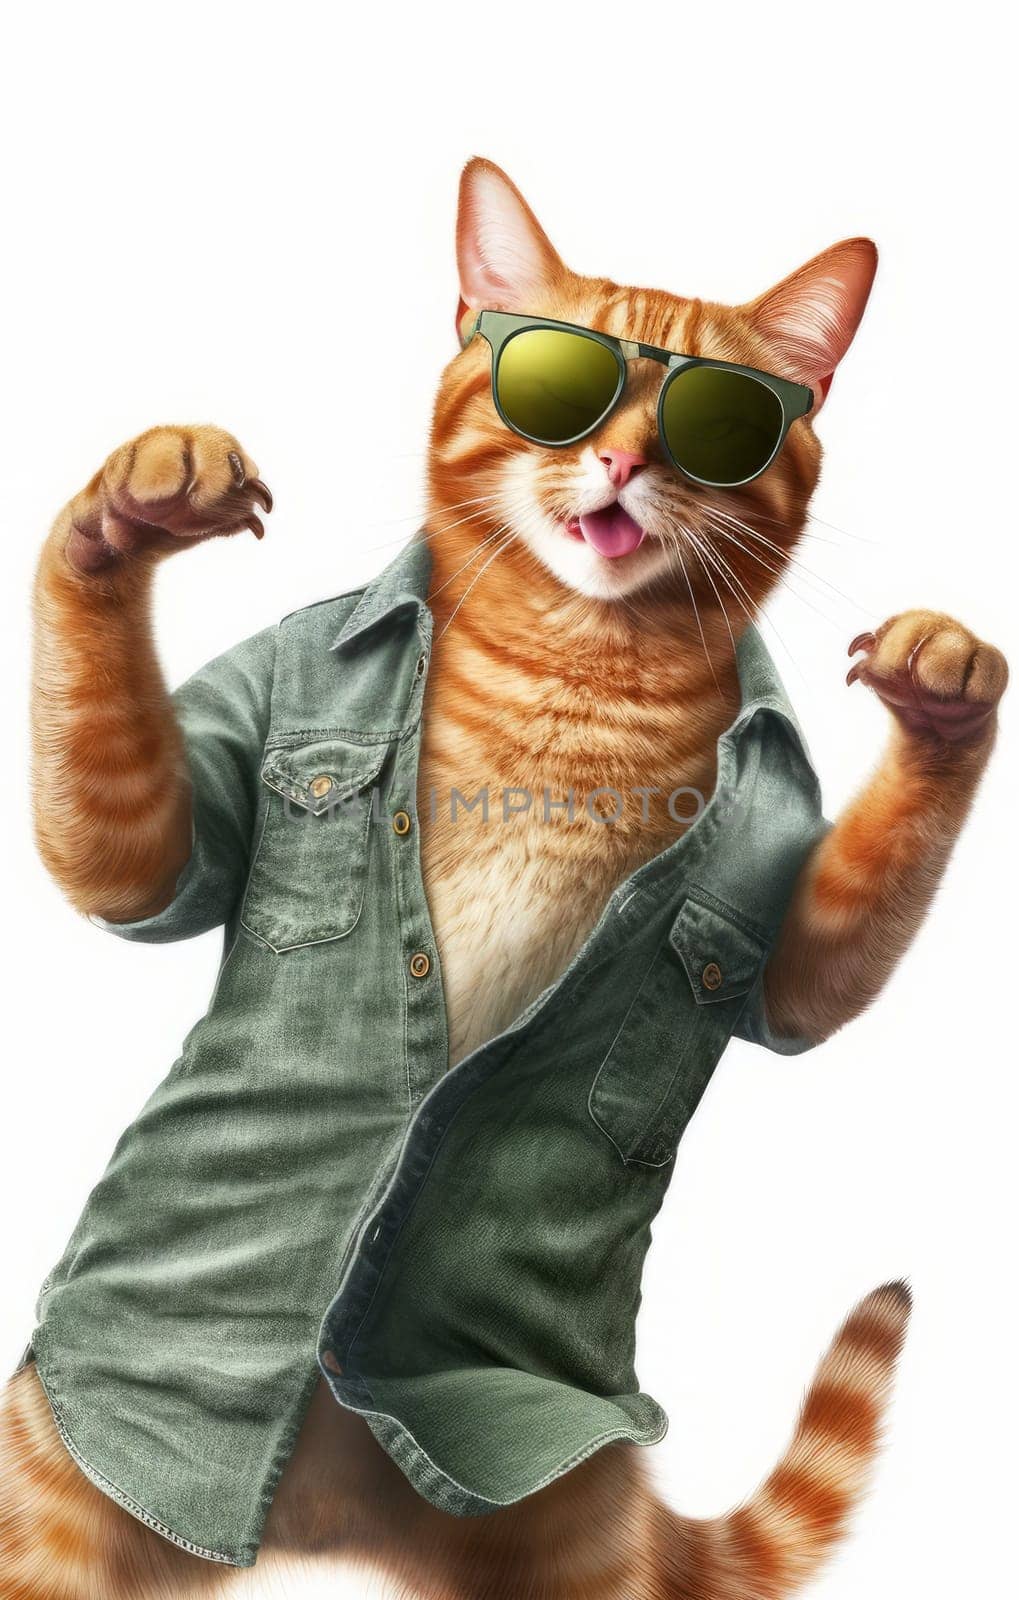 Cute ginger cat in a denim shirt and sunglasses standing on a white background by Zakharova